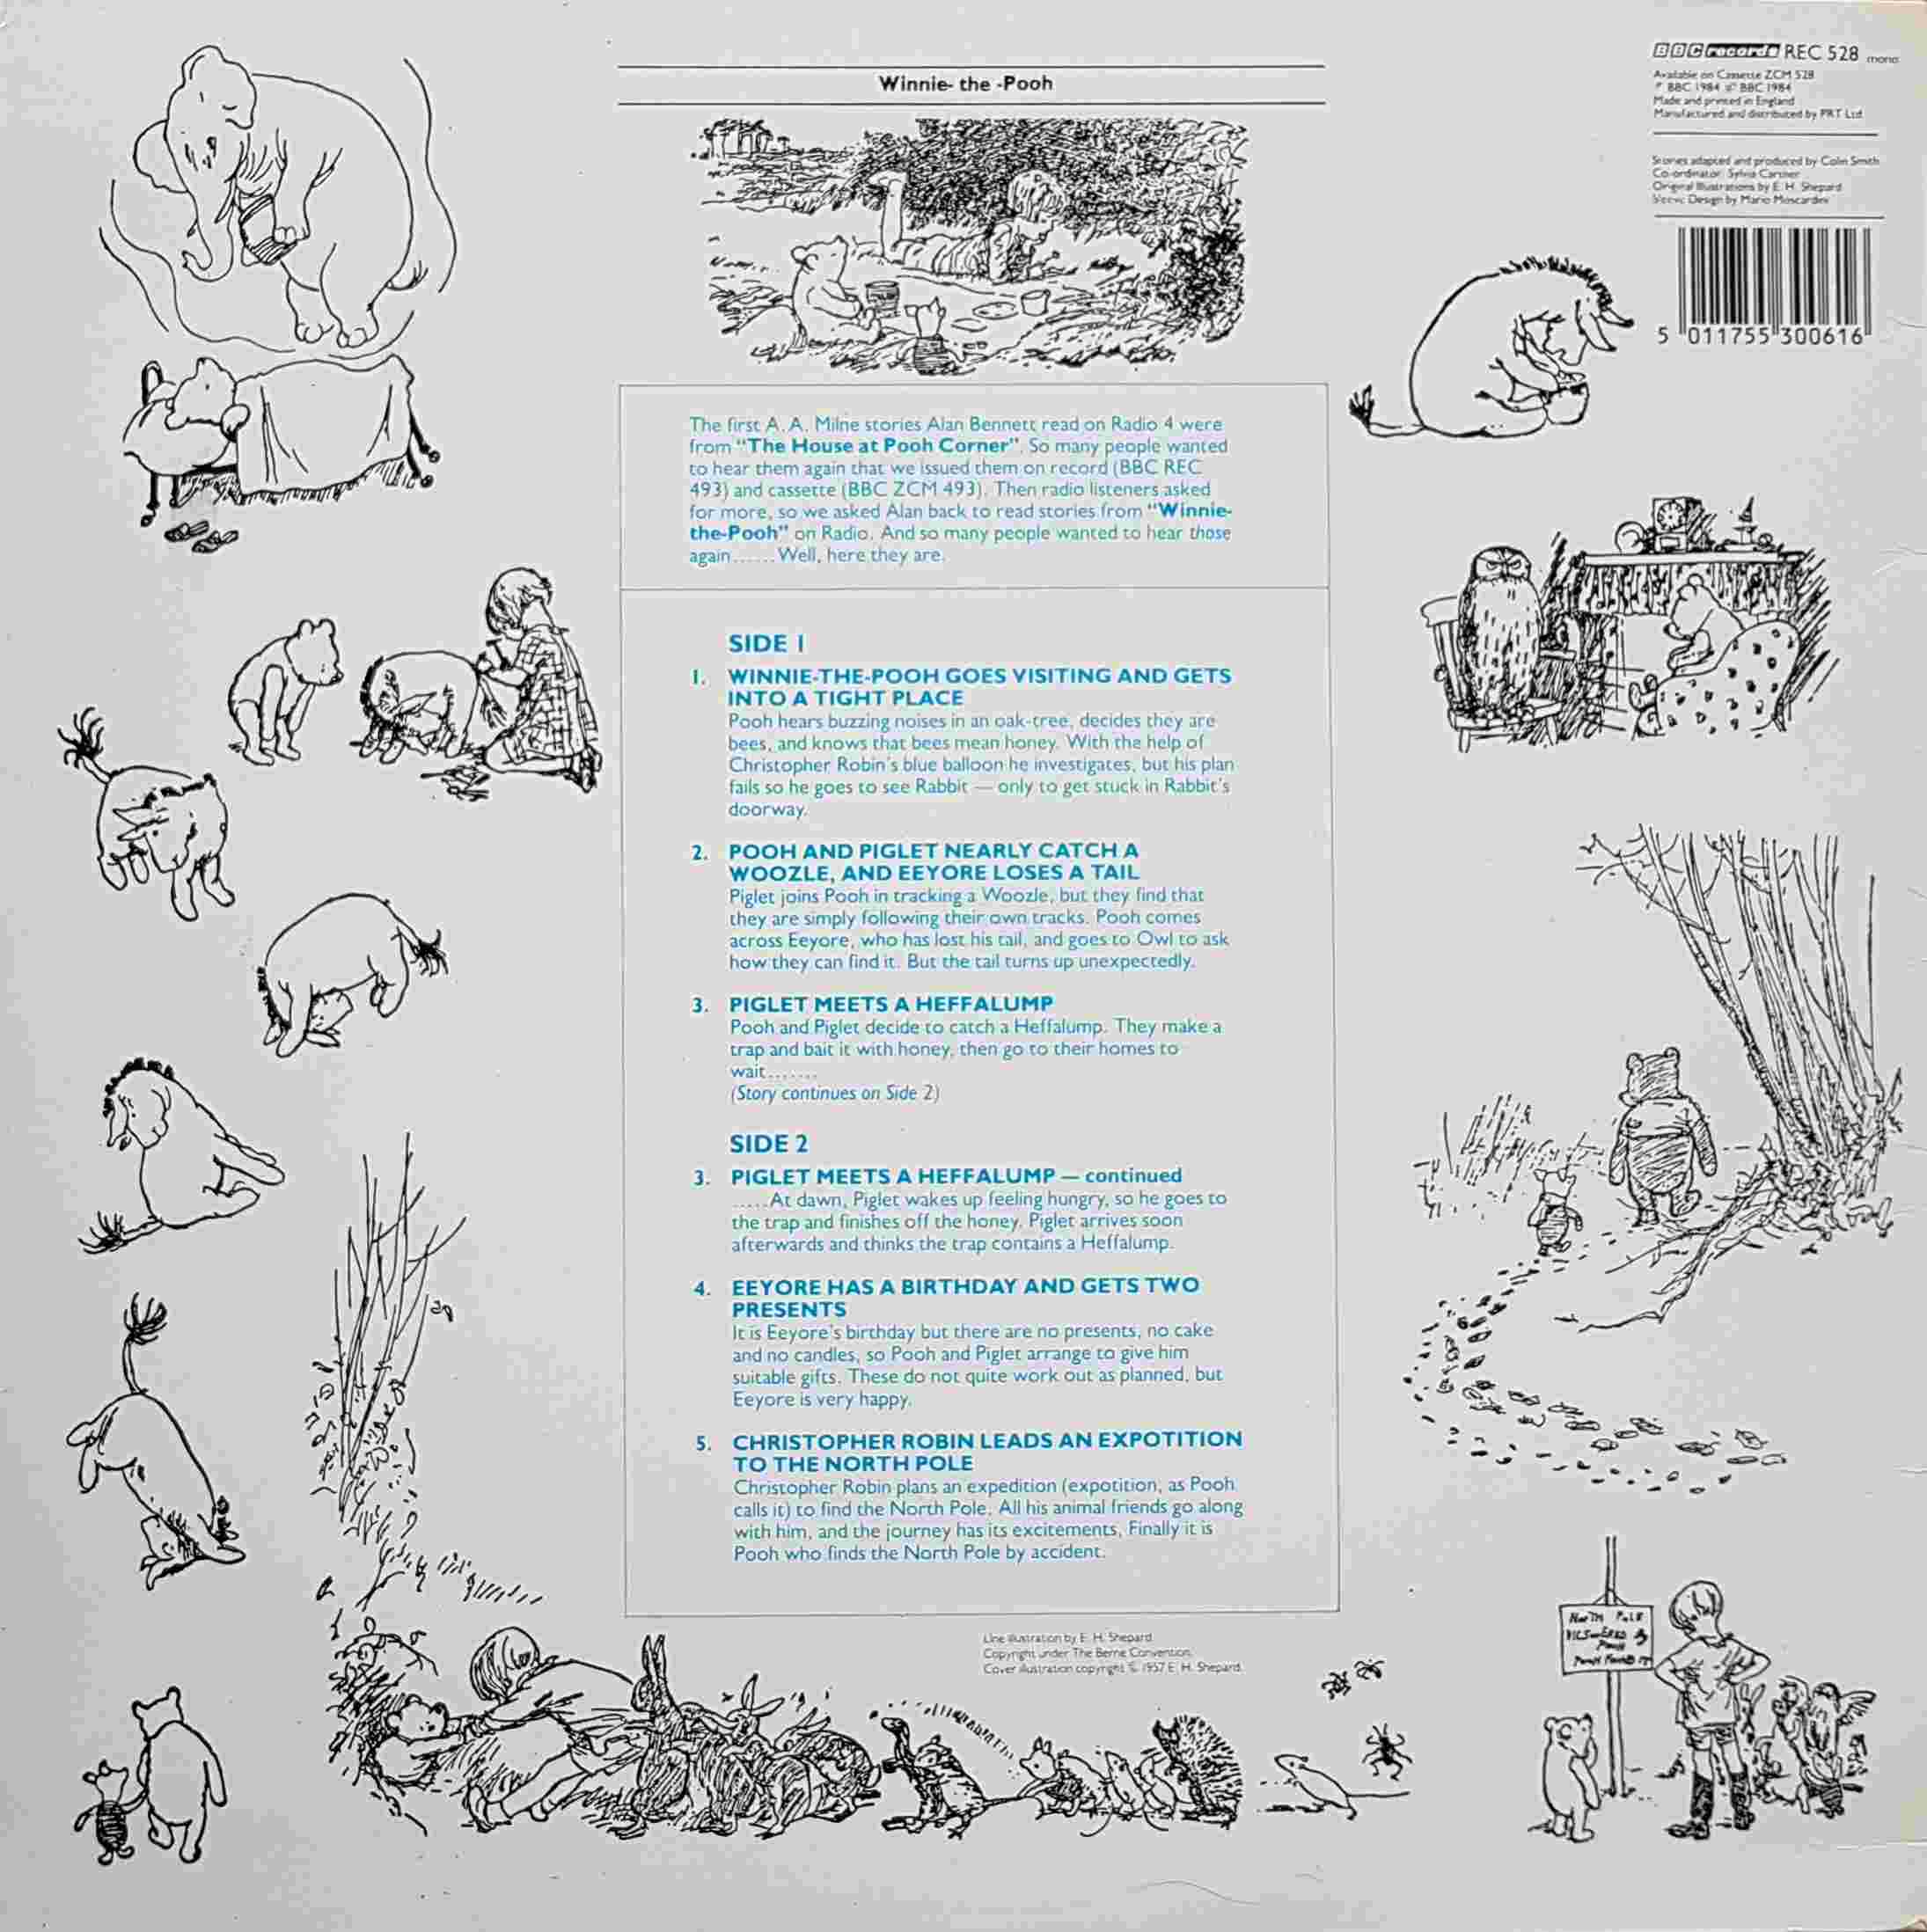 Picture of REC 528 Winnie the Pooh by artist A. A. Milne from the BBC records and Tapes library